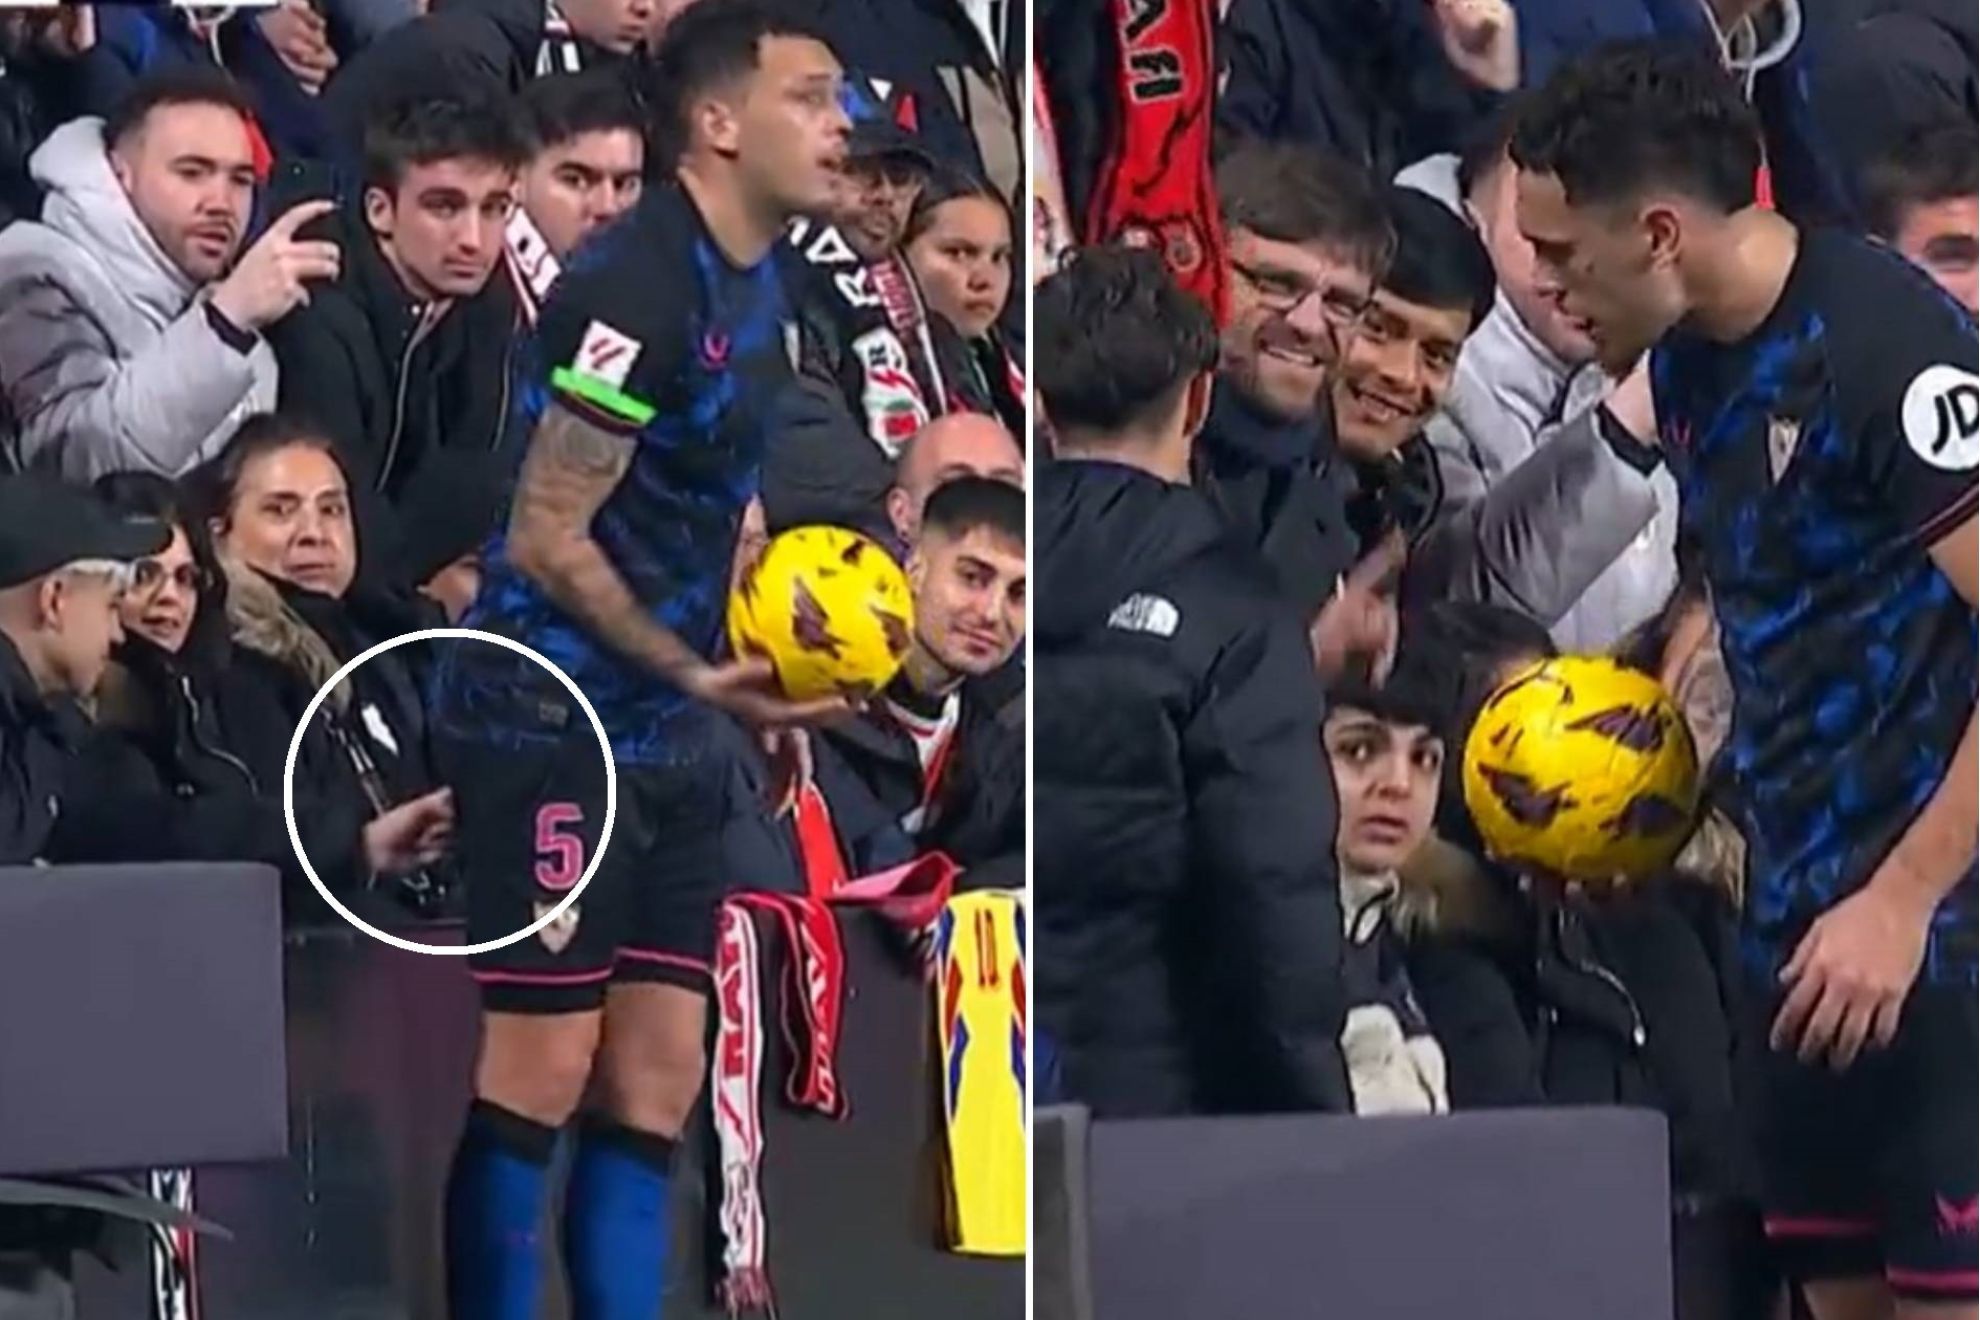 Lucas Ocampos was executing a throw-in when a fan prodded his rear end.